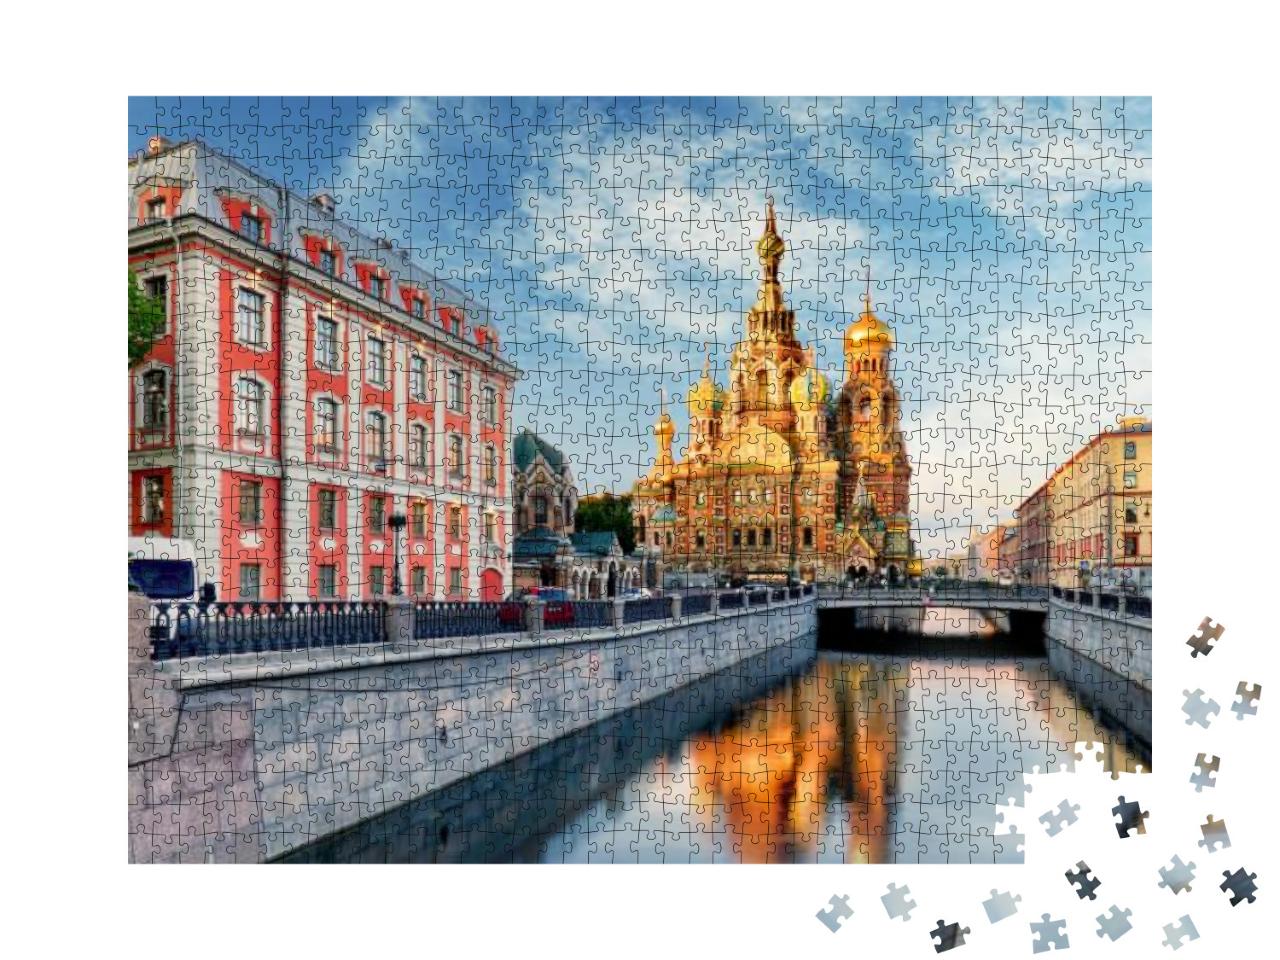 Church of the Savior on Spilled Blood, St. Petersburg, Ru... Jigsaw Puzzle with 1000 pieces